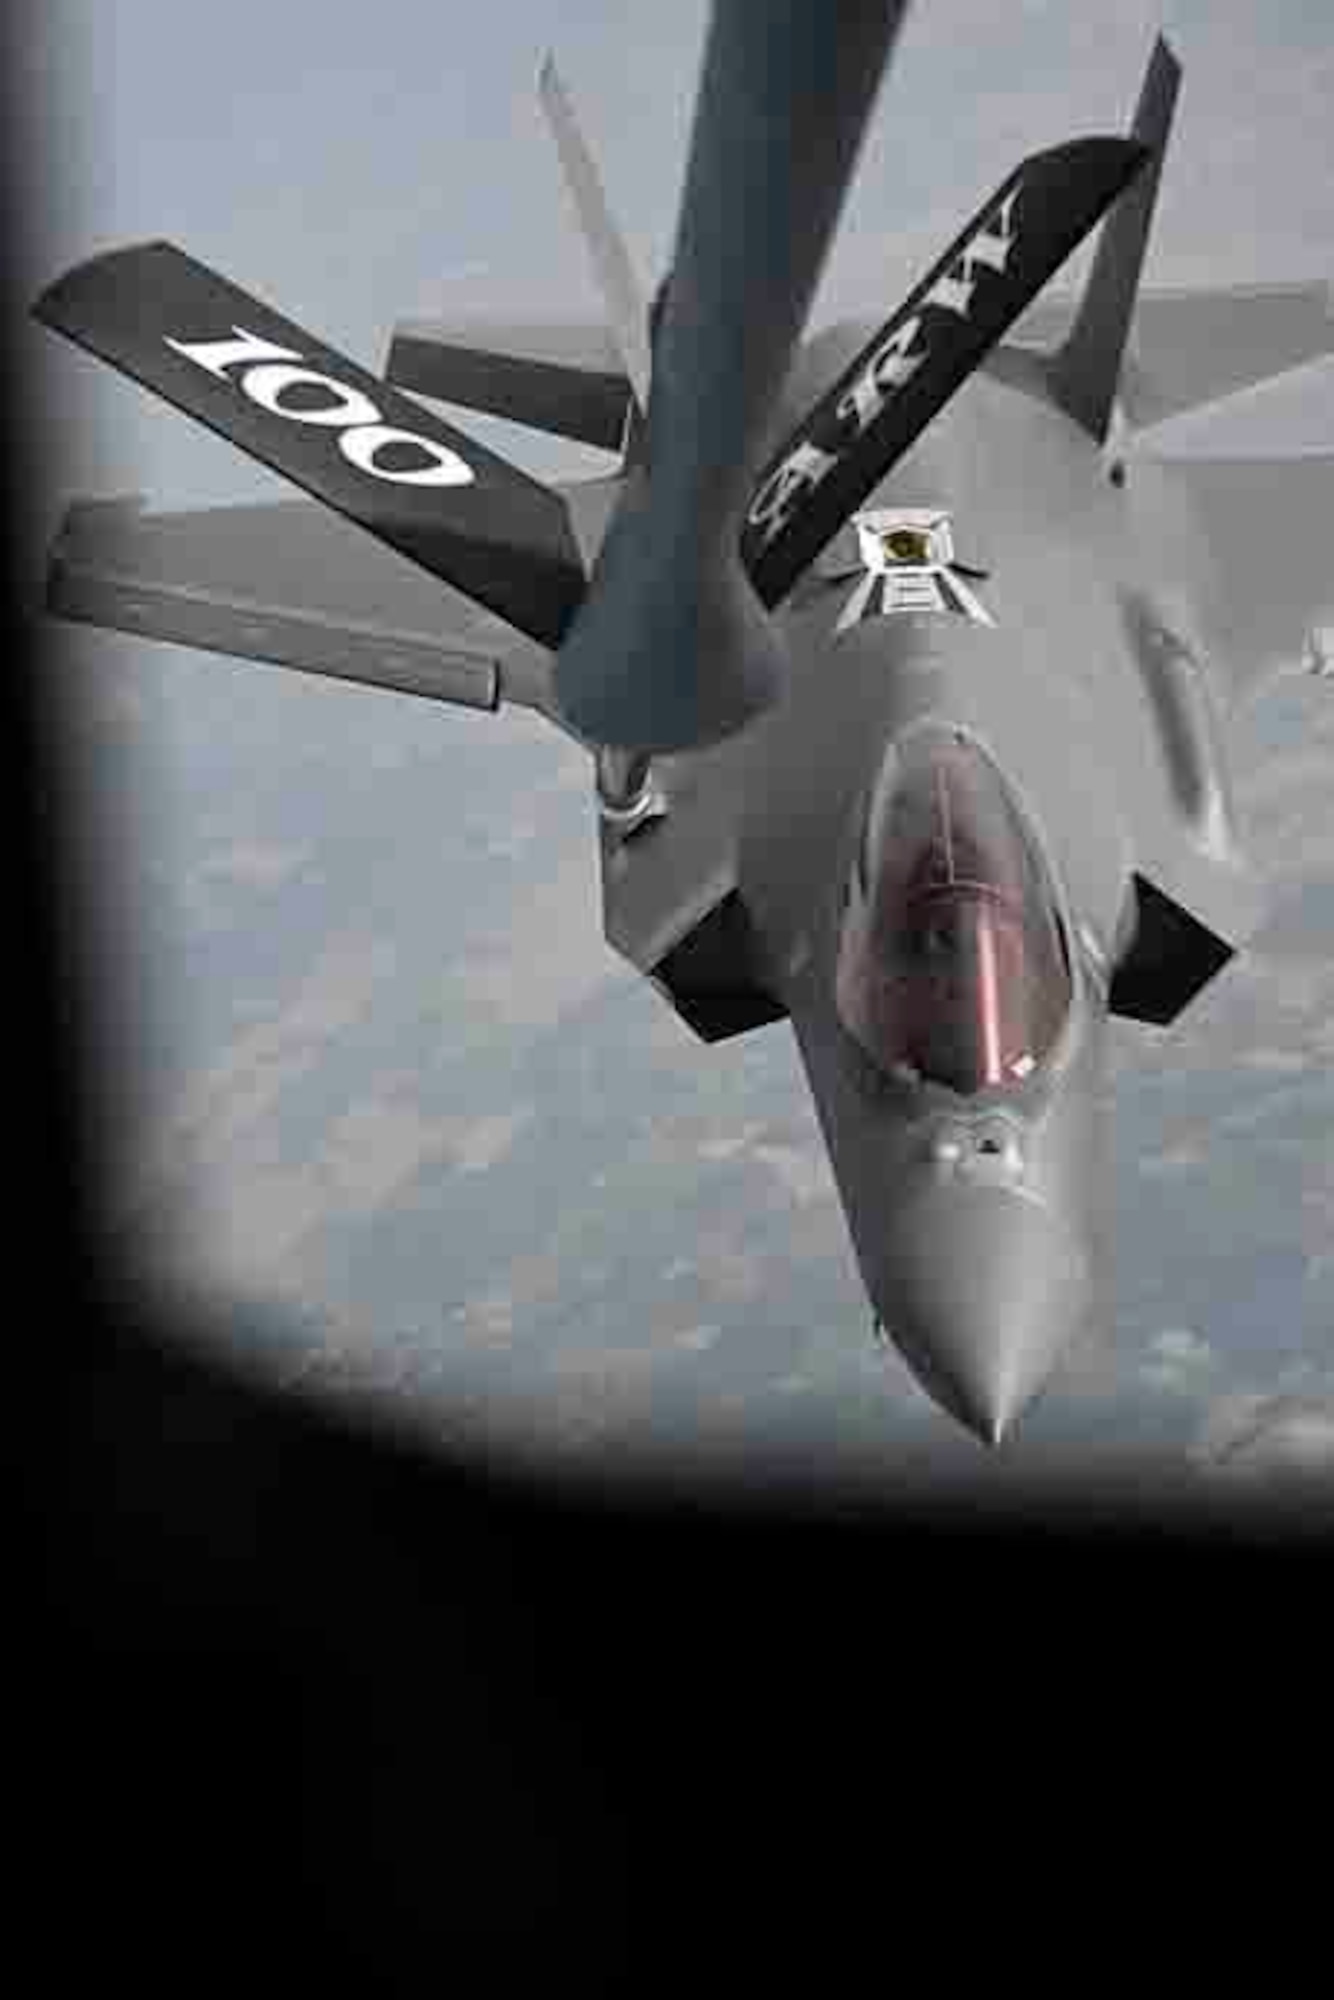 A U.S. Air Force F-35A Lightning II aircraft assigned to the 4th Fighter Squadron, Hill Air Force Base, Utah, prepares to receive fuel from a KC-135 Stratotanker aircraft assigned to the 100th Air Refueling Wing, Royal Air Force Mildenhall, England, over France during exercise Atlantic Trident, May 26, 2021. U.S. Air Forces in Europe - Air Forces Africa operate from locations with varying levels of capacity and support and ensure Airmen and aircrews are postured to deliver lethal combat power across the spectrum of military operations. (U.S. Air Force photo by Senior Airman Joseph Barron)